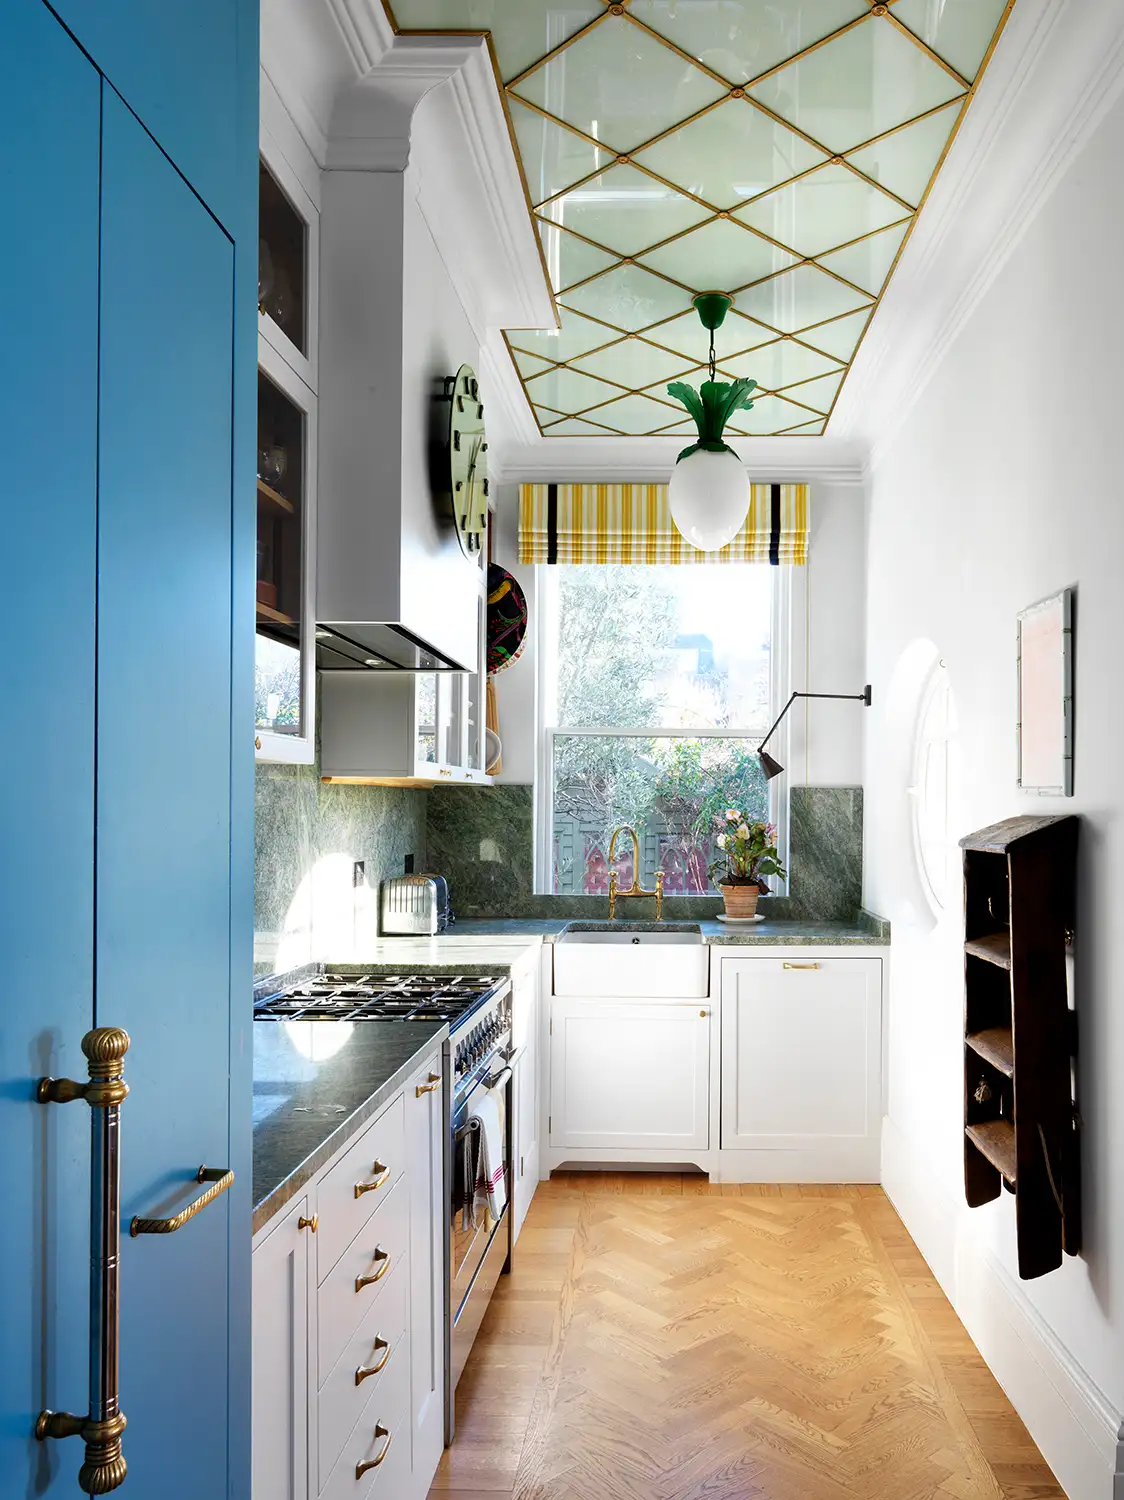 A kitchen with a beautiful blue marble counter